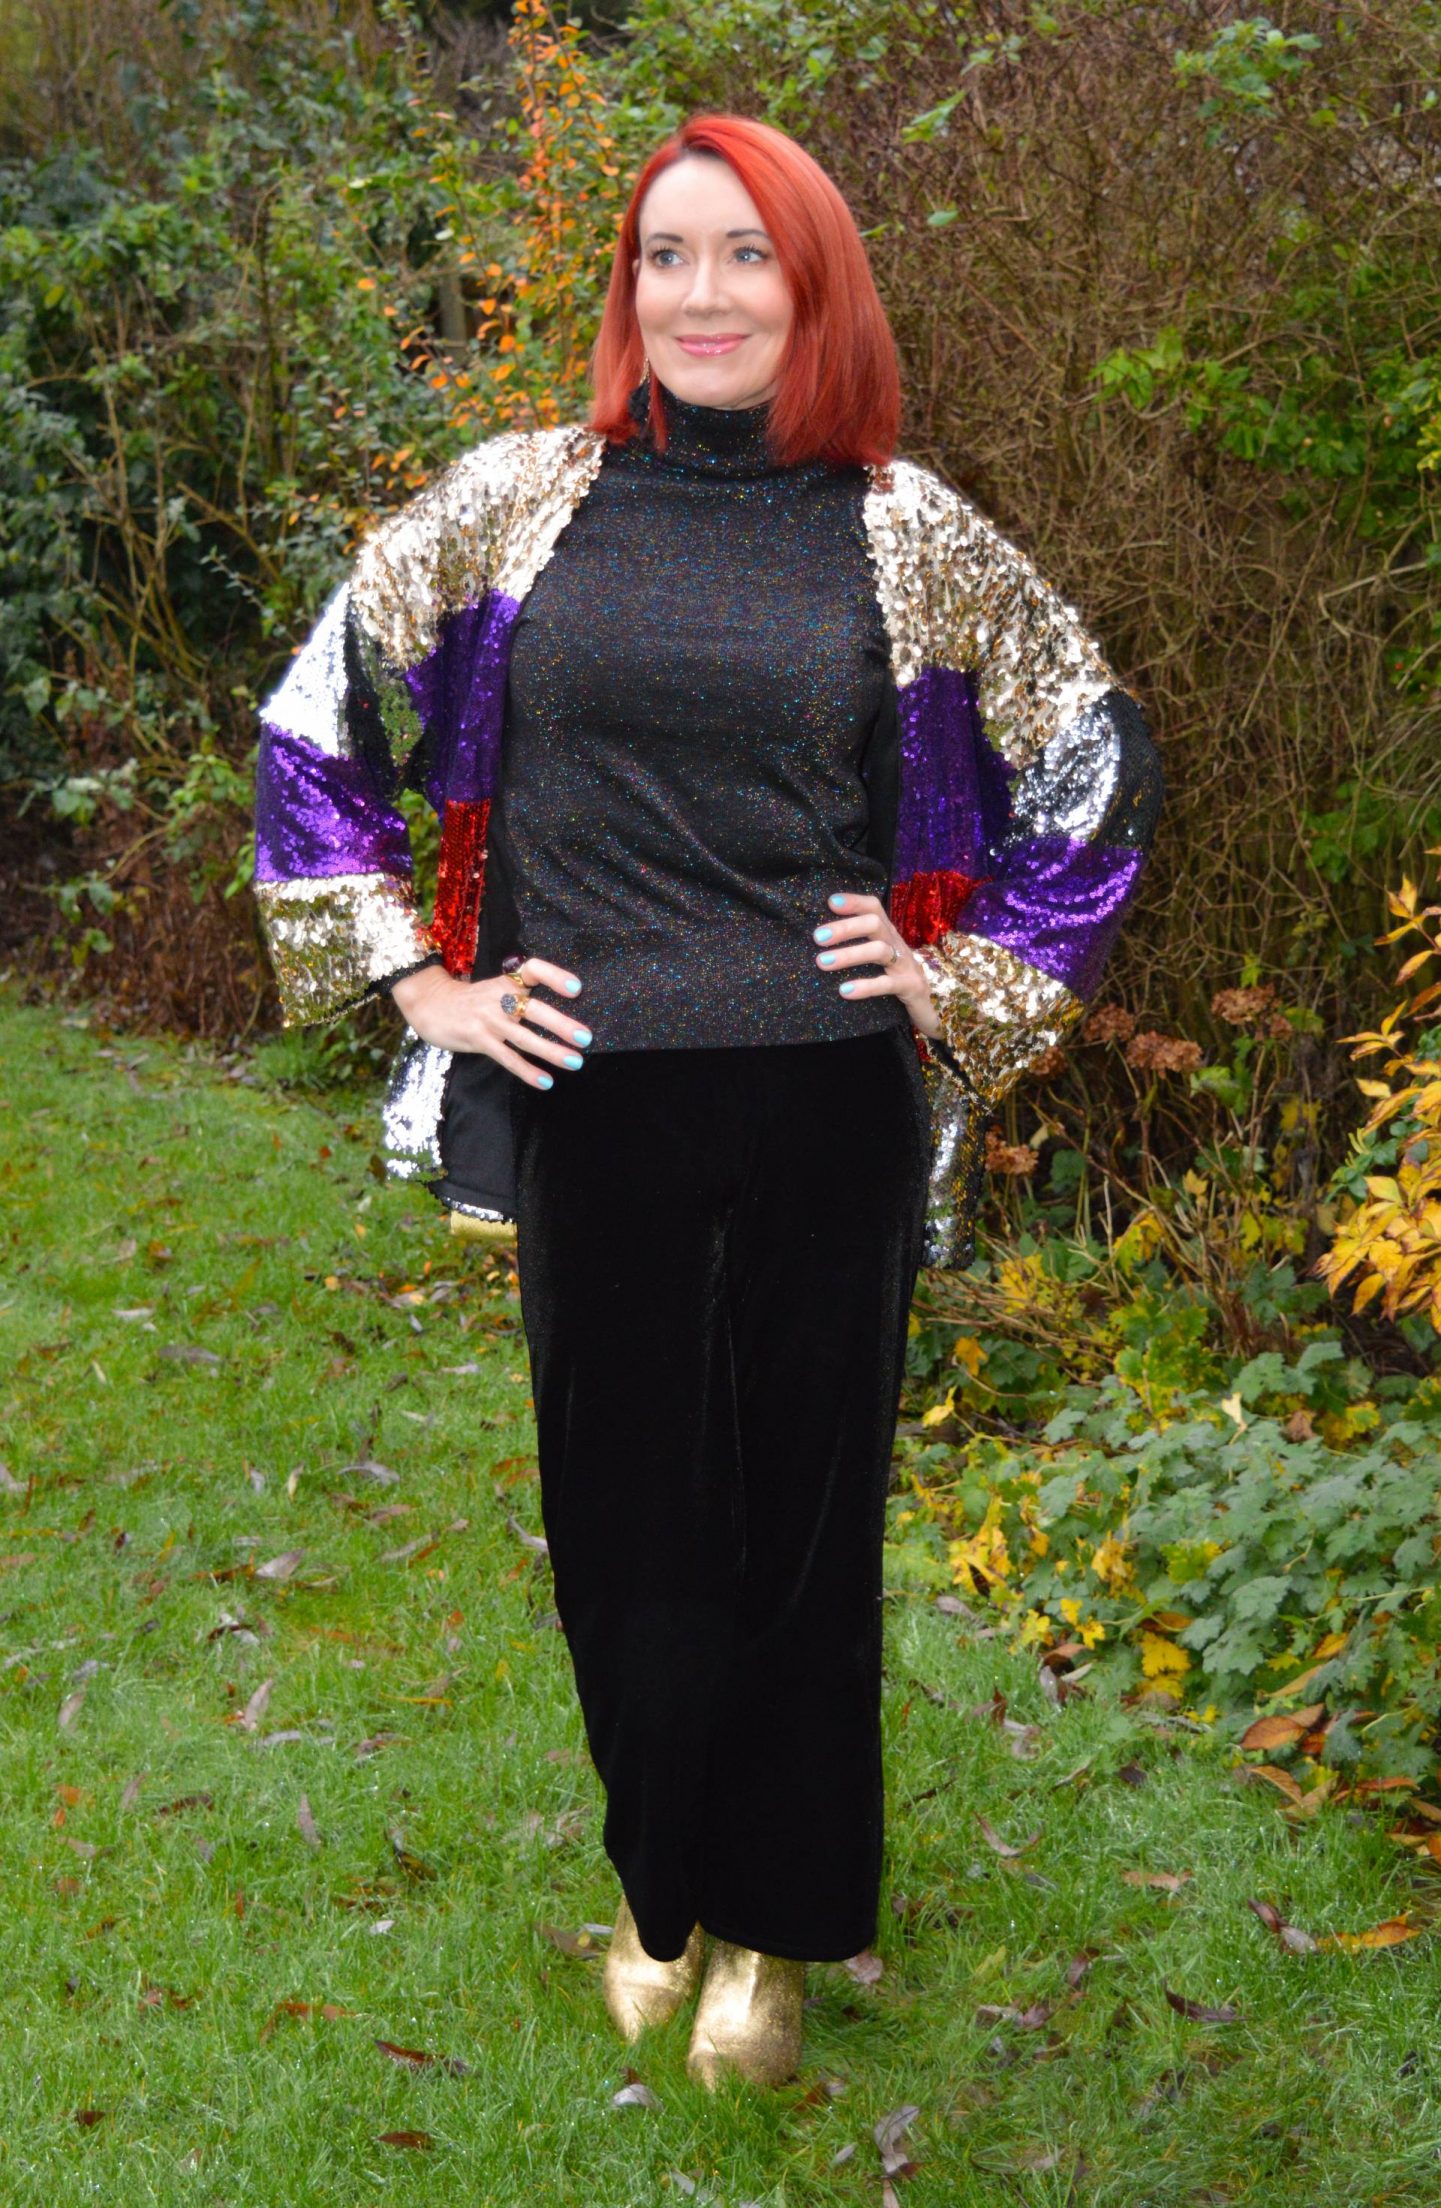 New Year's Eve Outfits - December's Thrifty Six, Boohoo striped sequin kimono jacket, Very black velvet trousers, TU black sparkly turtleneck jumper